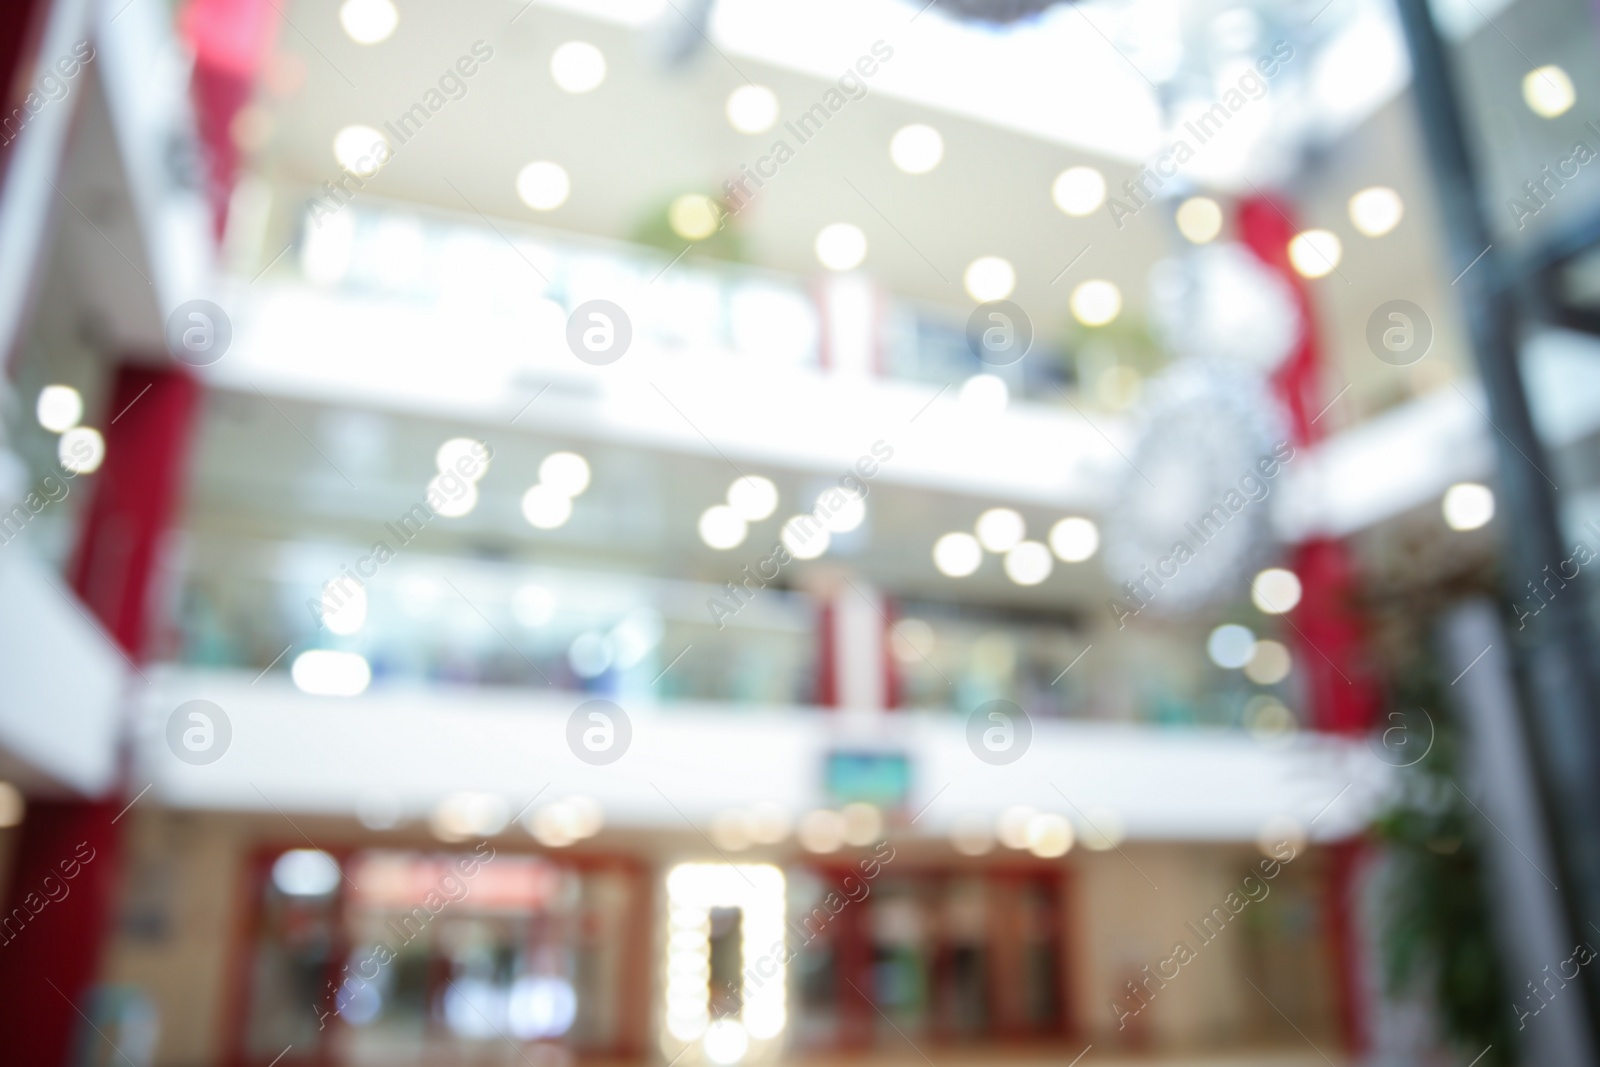 Photo of Blurred view of shopping mall entrance hall interior